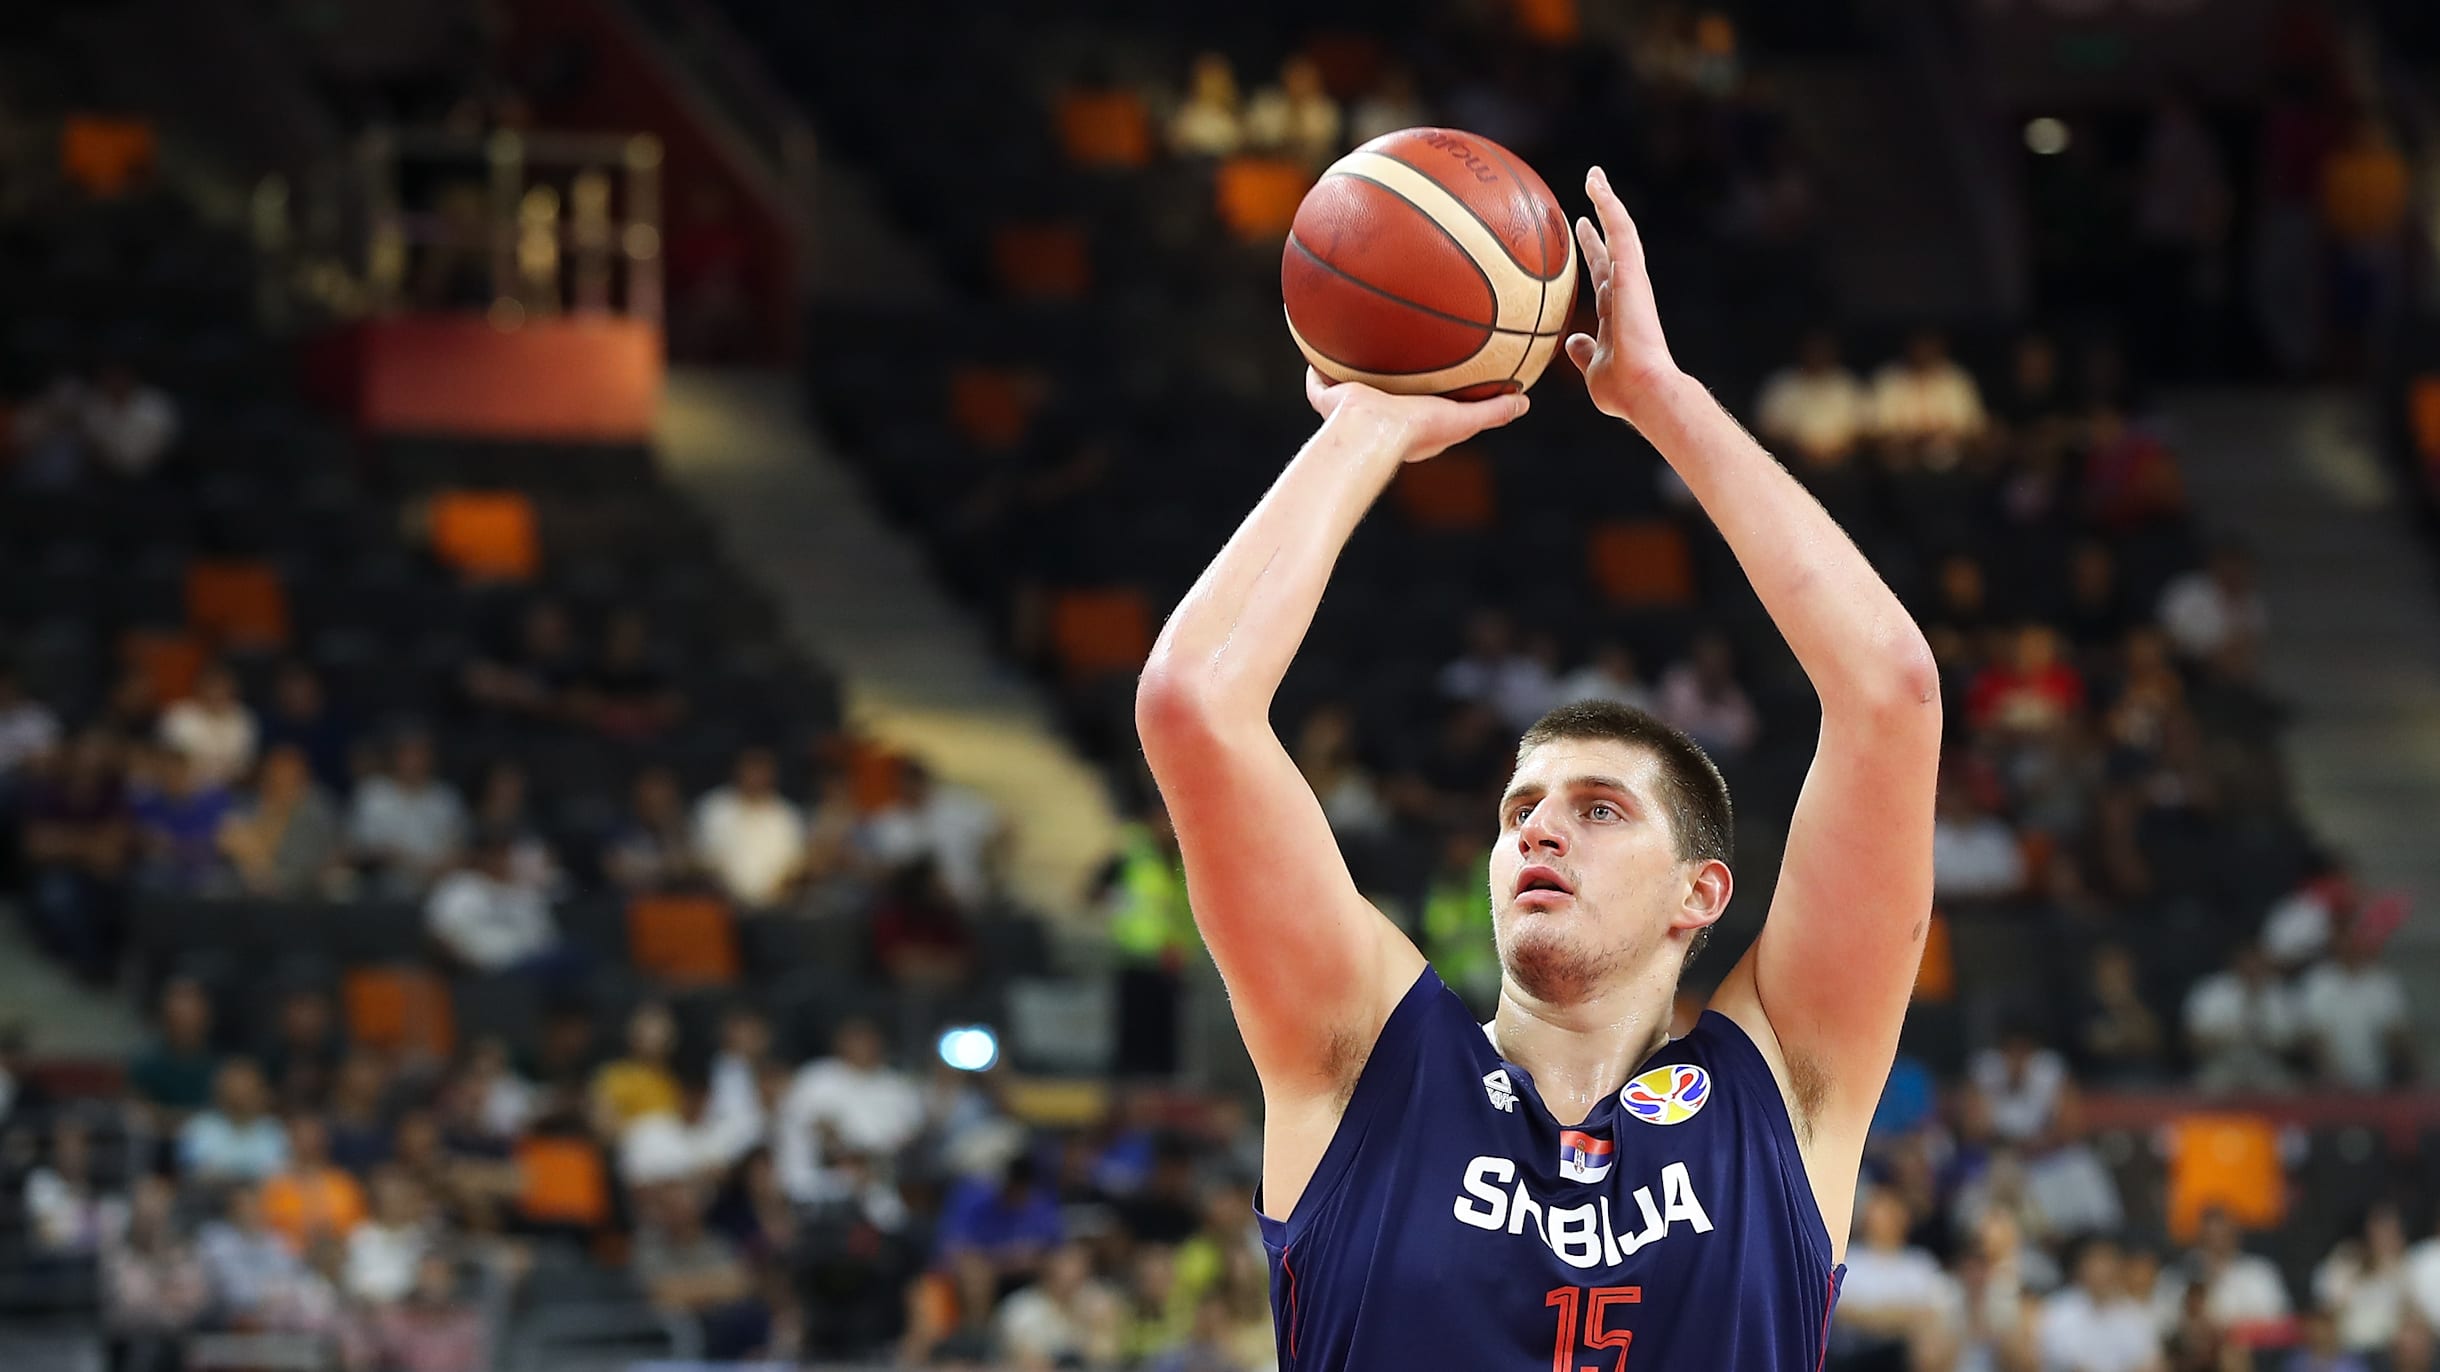 FIBA World Cup: Format, list of NBA players and how to watch